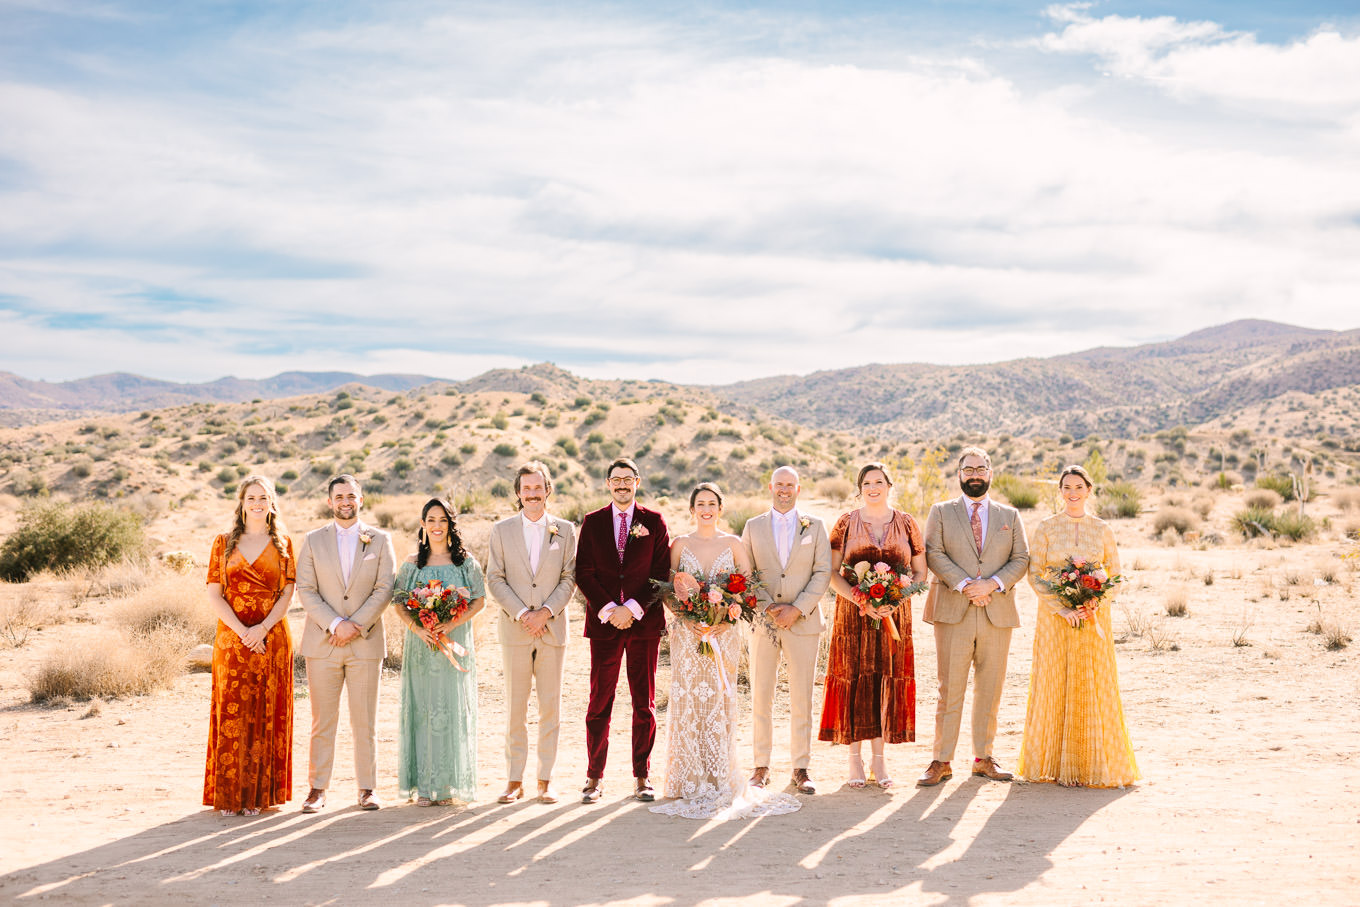 Rimrock Ranch wedding in Pioneertown | Wedding and elopement photography roundup | Los Angeles and Palm Springs photographer | #losangeleswedding #palmspringswedding #elopementphotographer Source: Mary Costa Photography | Los Angeles